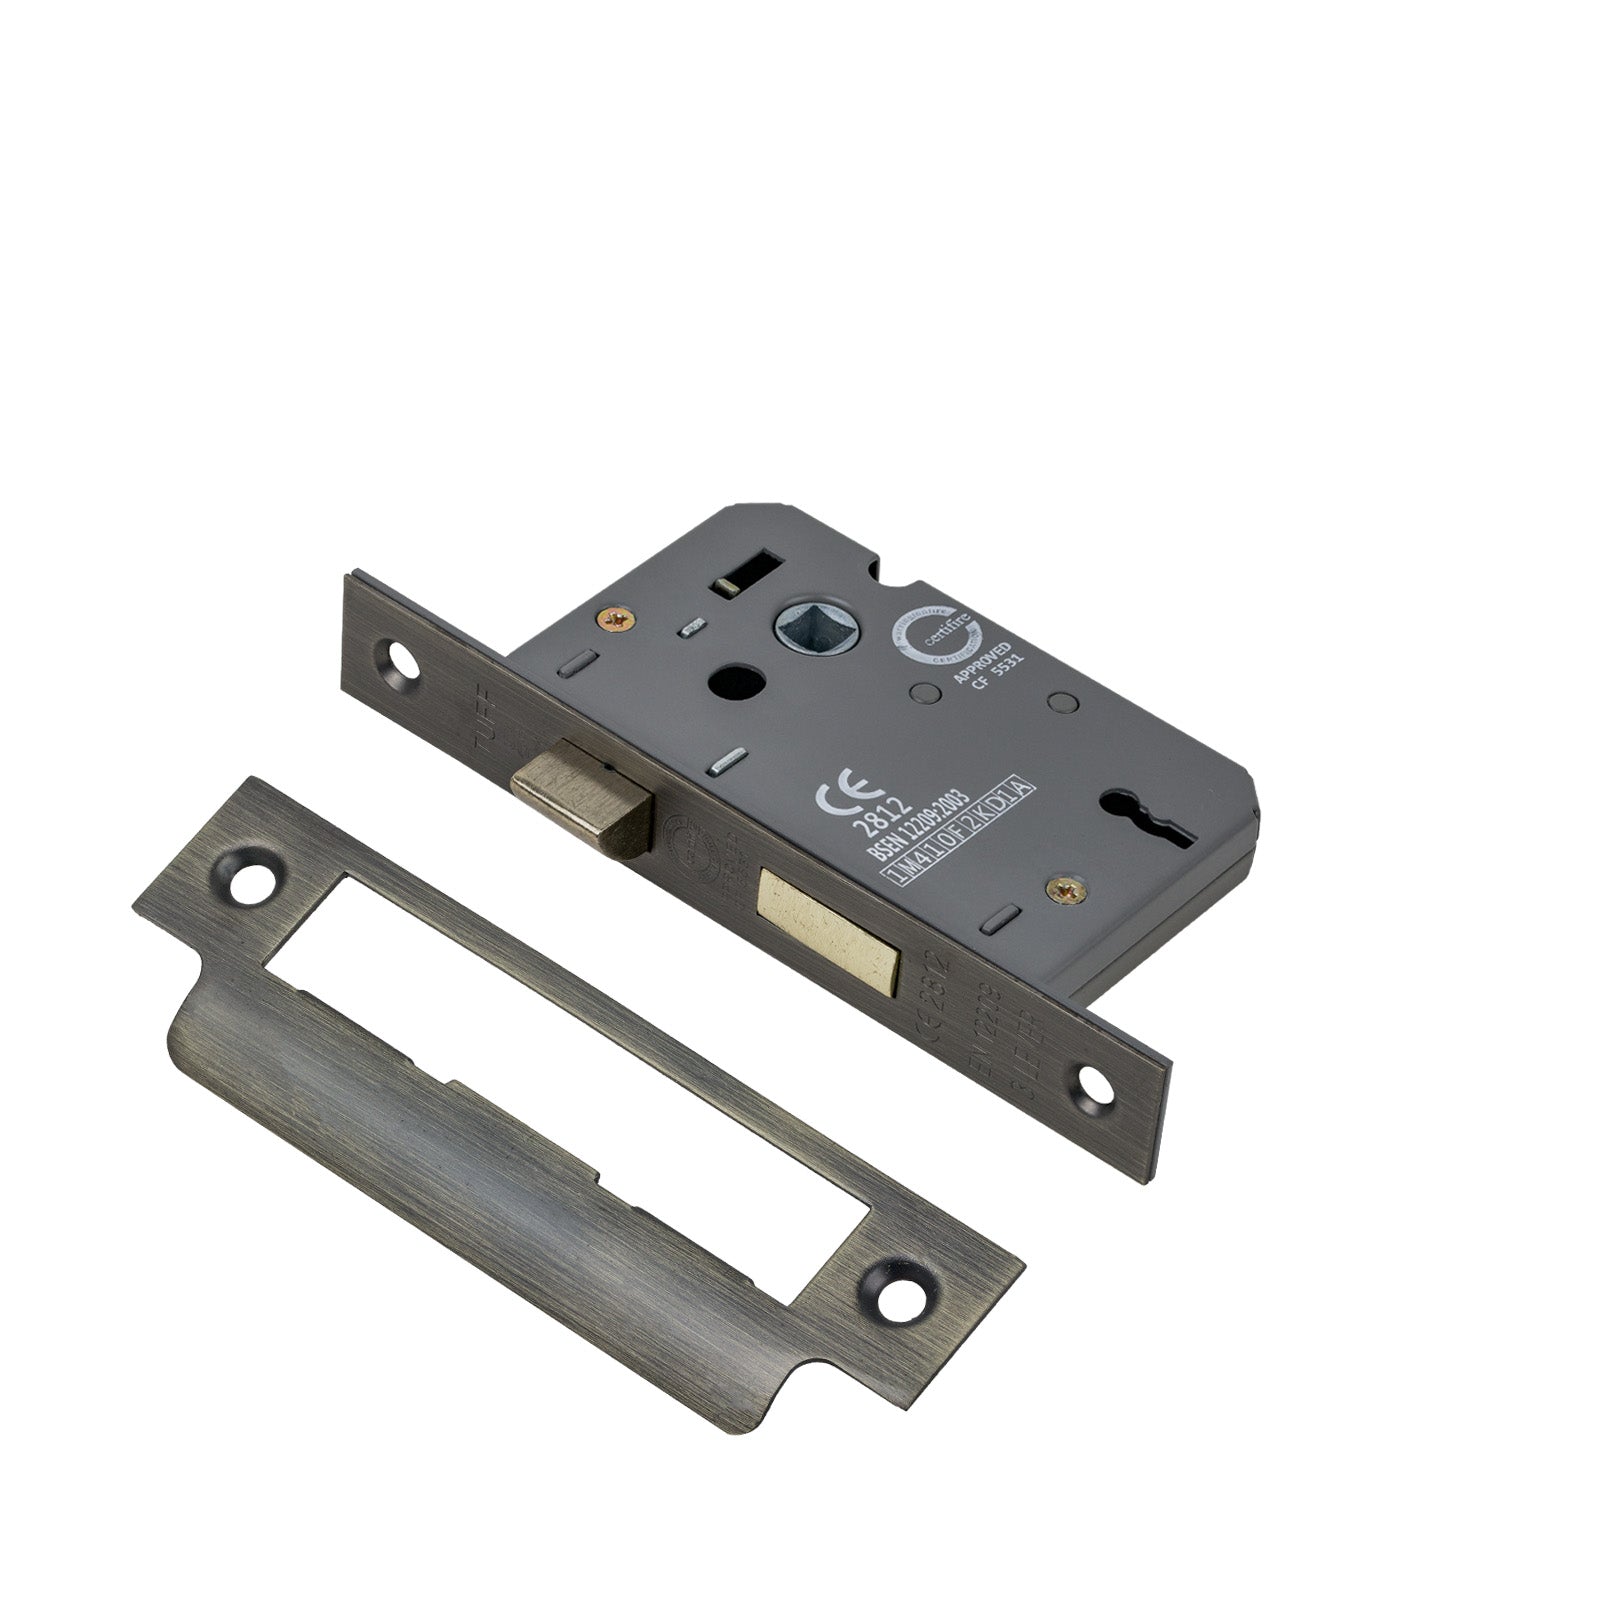 SHOW 3 Lever Sash Lock - 2.5 Inch with Urban Bronze finished forend and striker plate